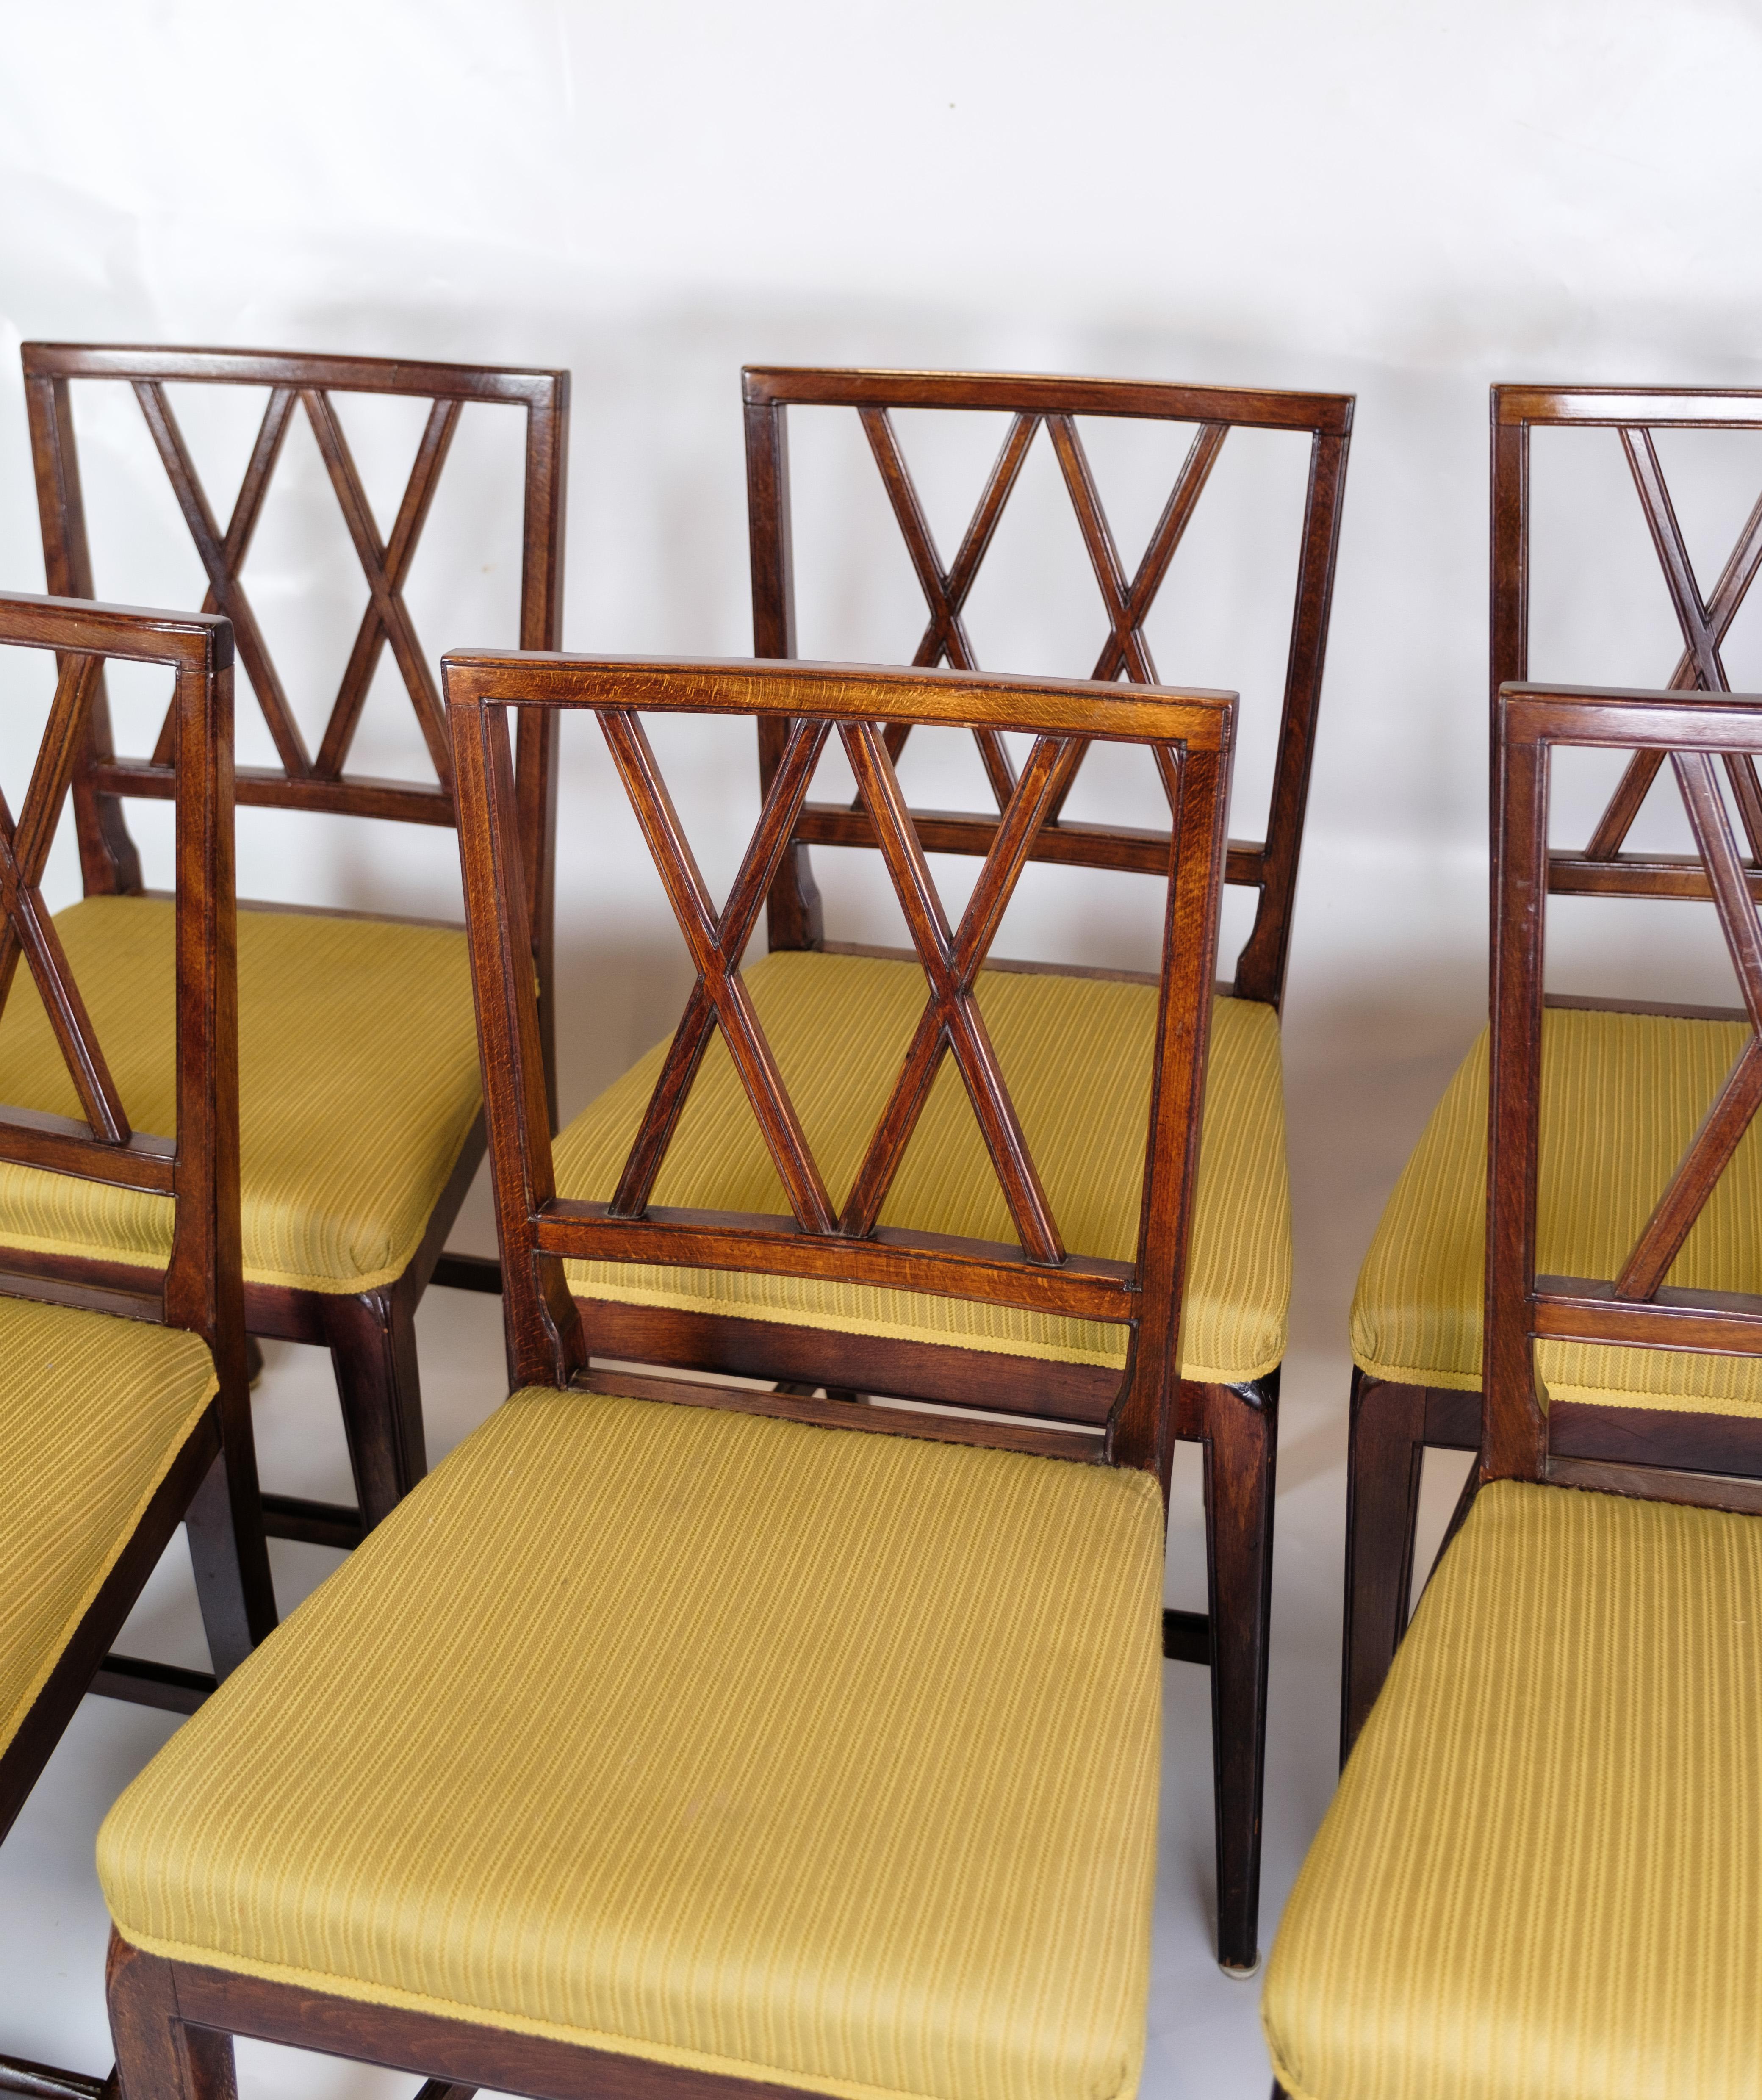 Exquisite Set of Six Dining Chairs by Ole Wanscher, Upholstered in Light Yellow Fabric, Crafted in Mahogany by A.J. Iversen in Denmark circa 1950s

Immerse yourself in the beauty of mid-20th-century Danish furniture craftsmanship with this